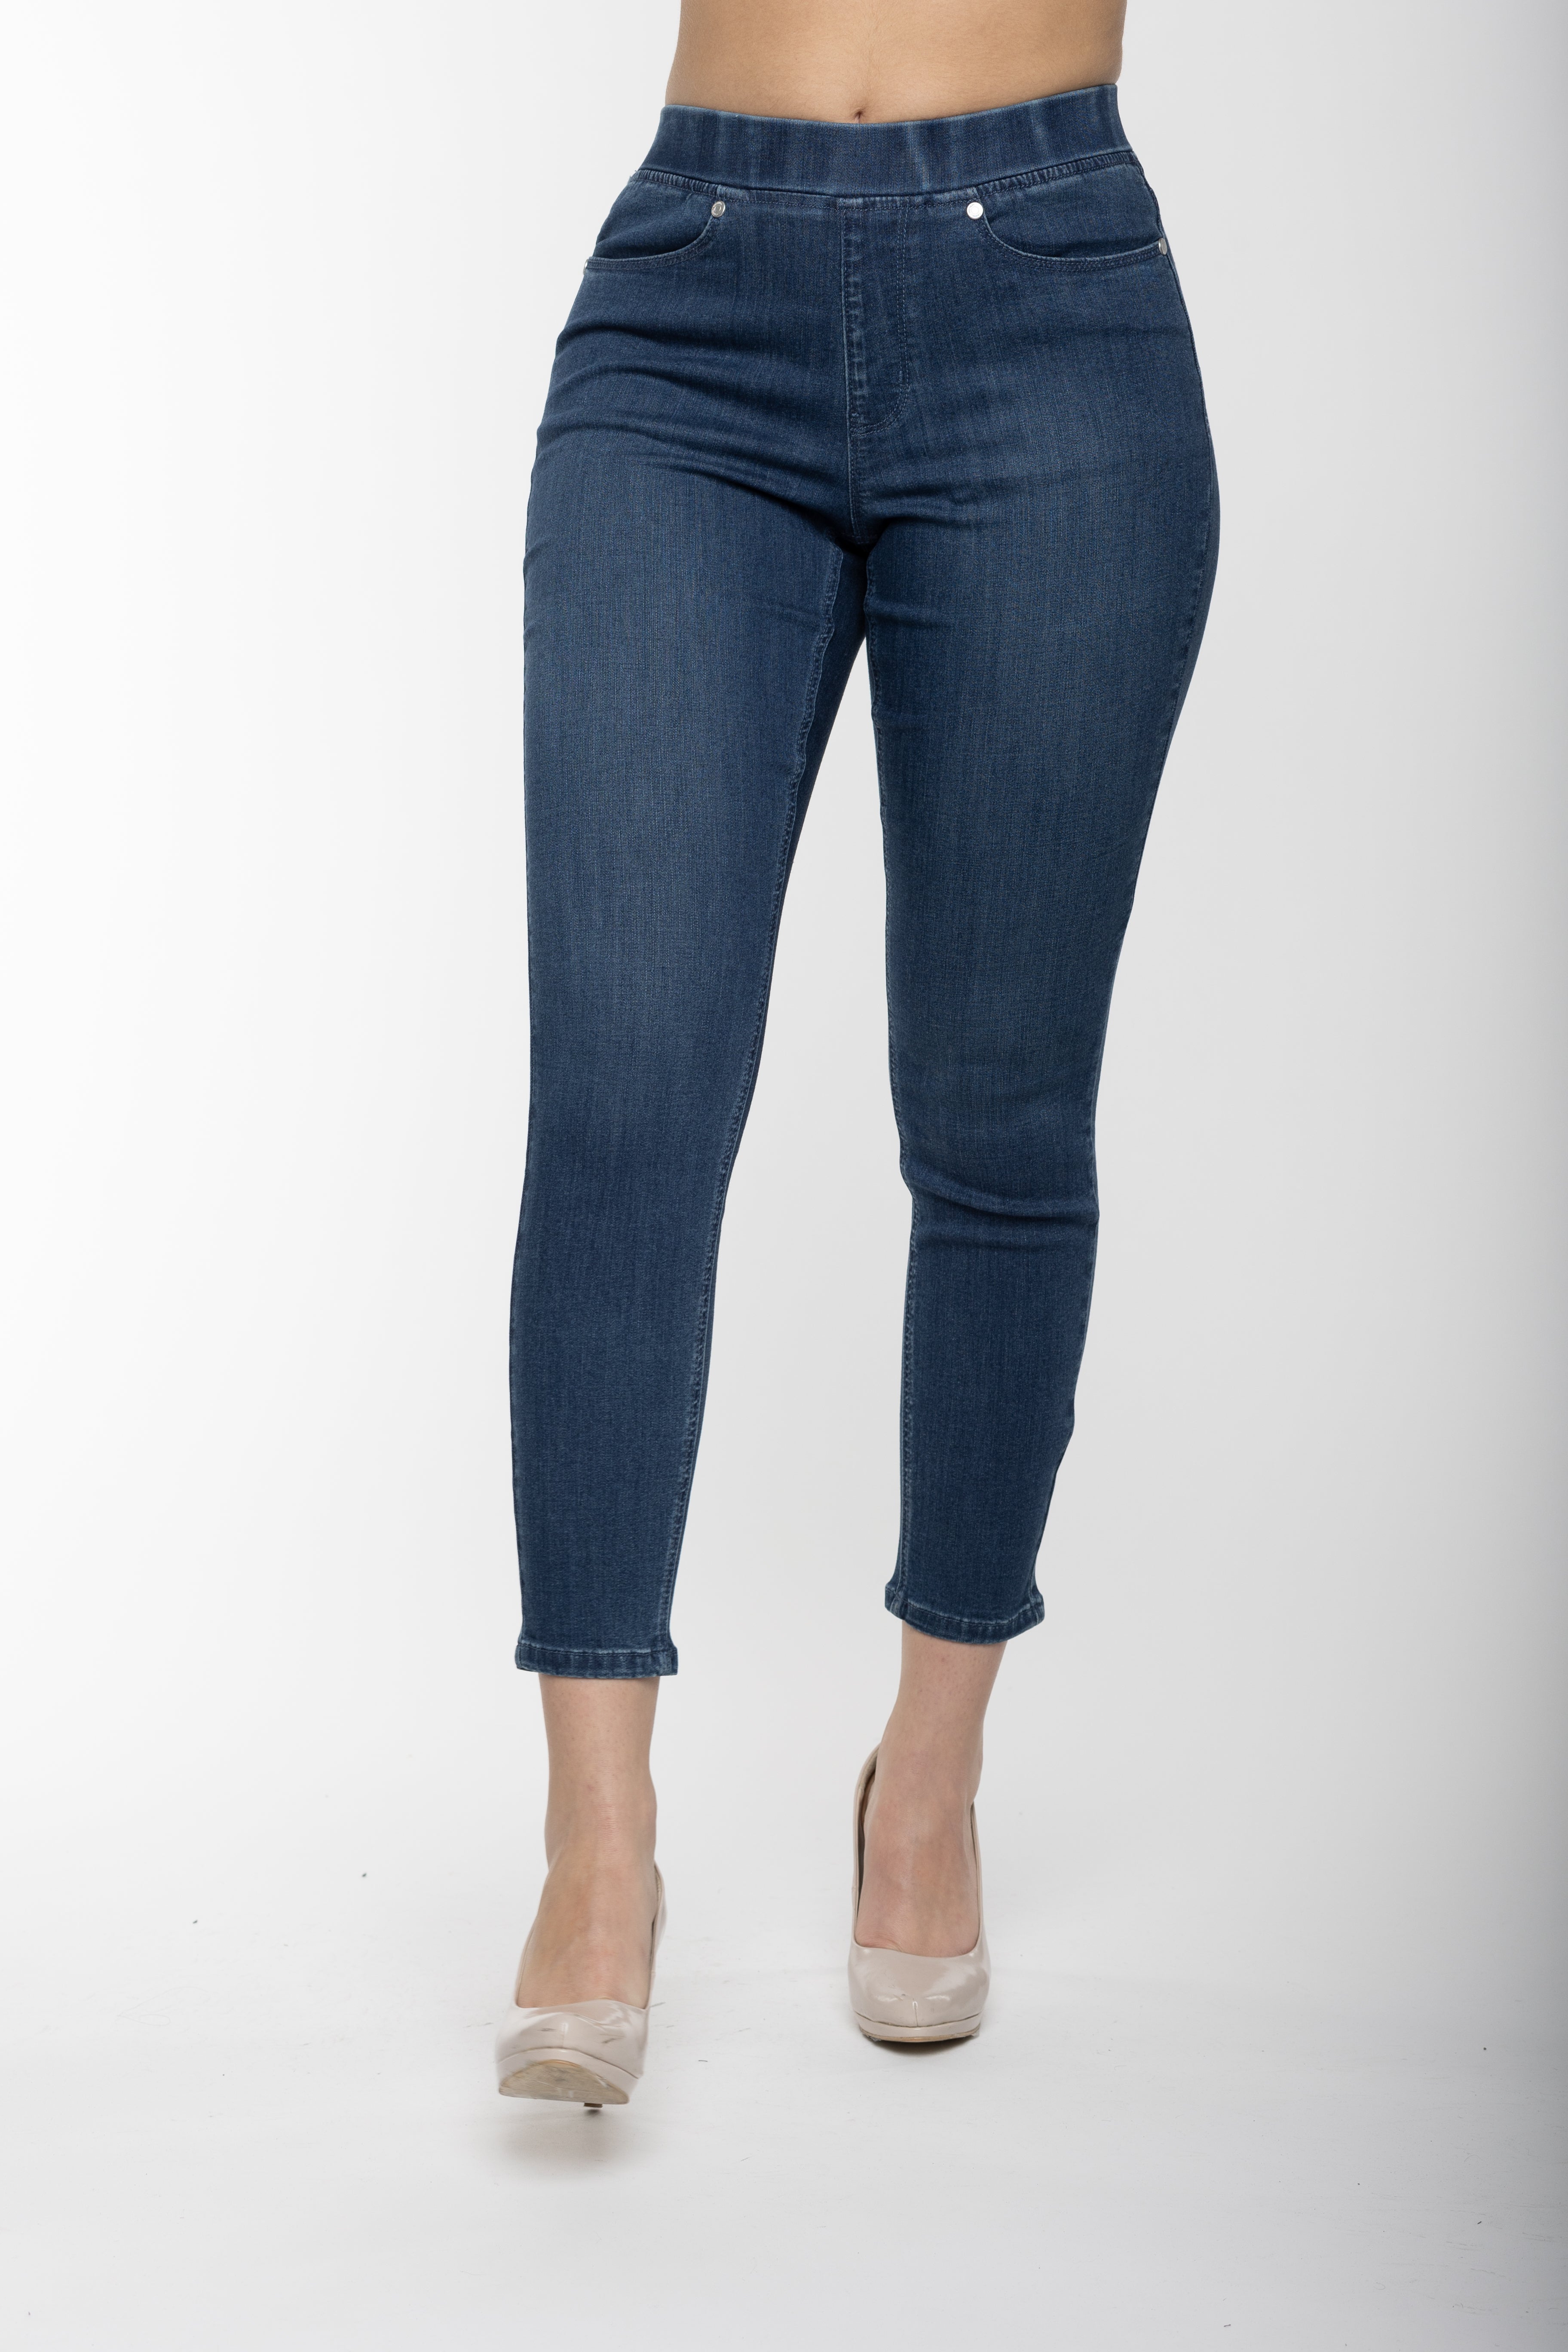 Carreli Jeans® | Premium Angela Fit Ankle Leg Length Pull-On in Stone Wash